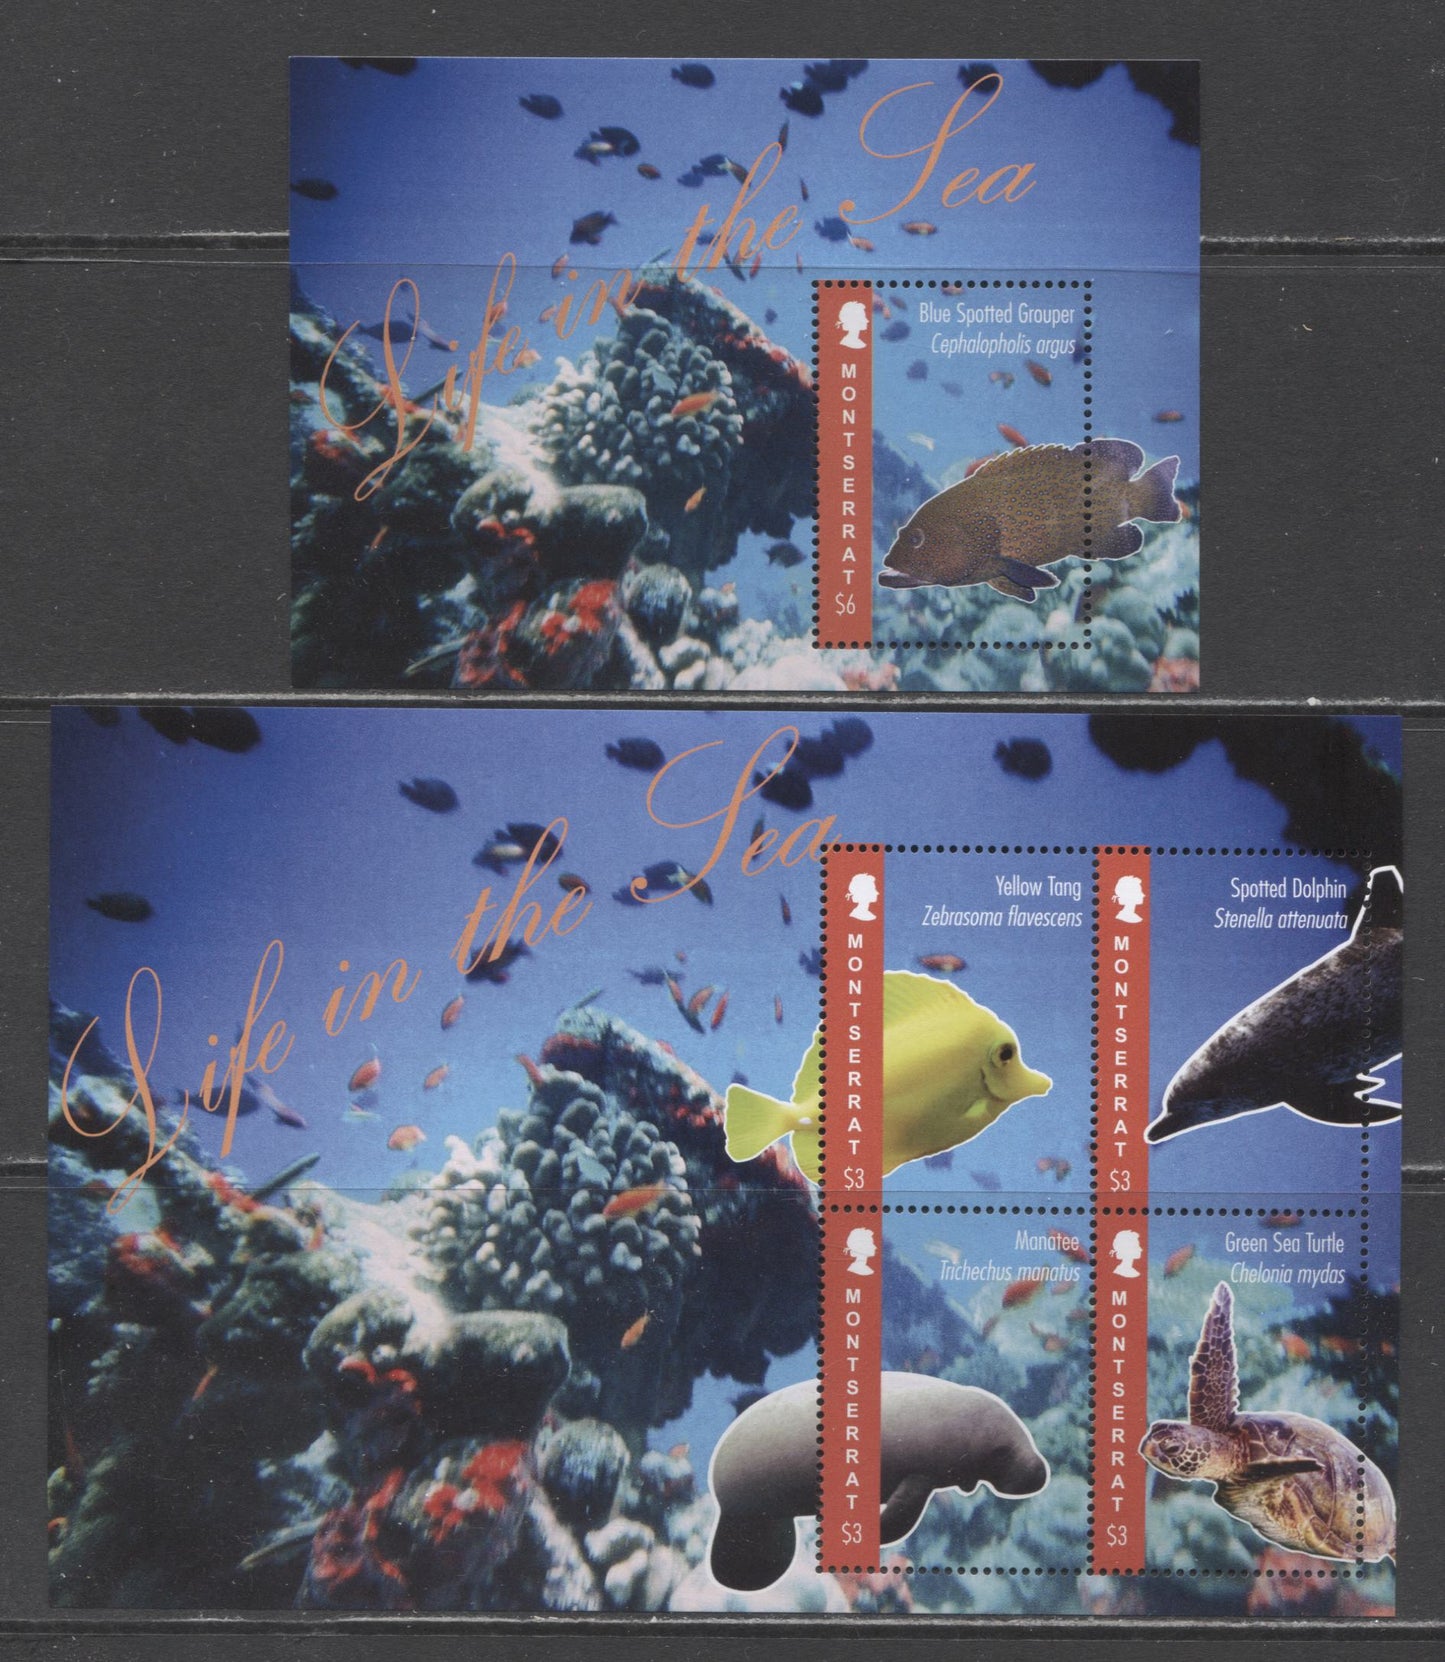 Lot 107 Montserrat SC#1293-1294 2012 Marine Life Issue, 2 VFNH Sheet Of 4 & Souvenir Sheet, Click on Listing to See ALL Pictures, 2017 Scott Cat. $13.8